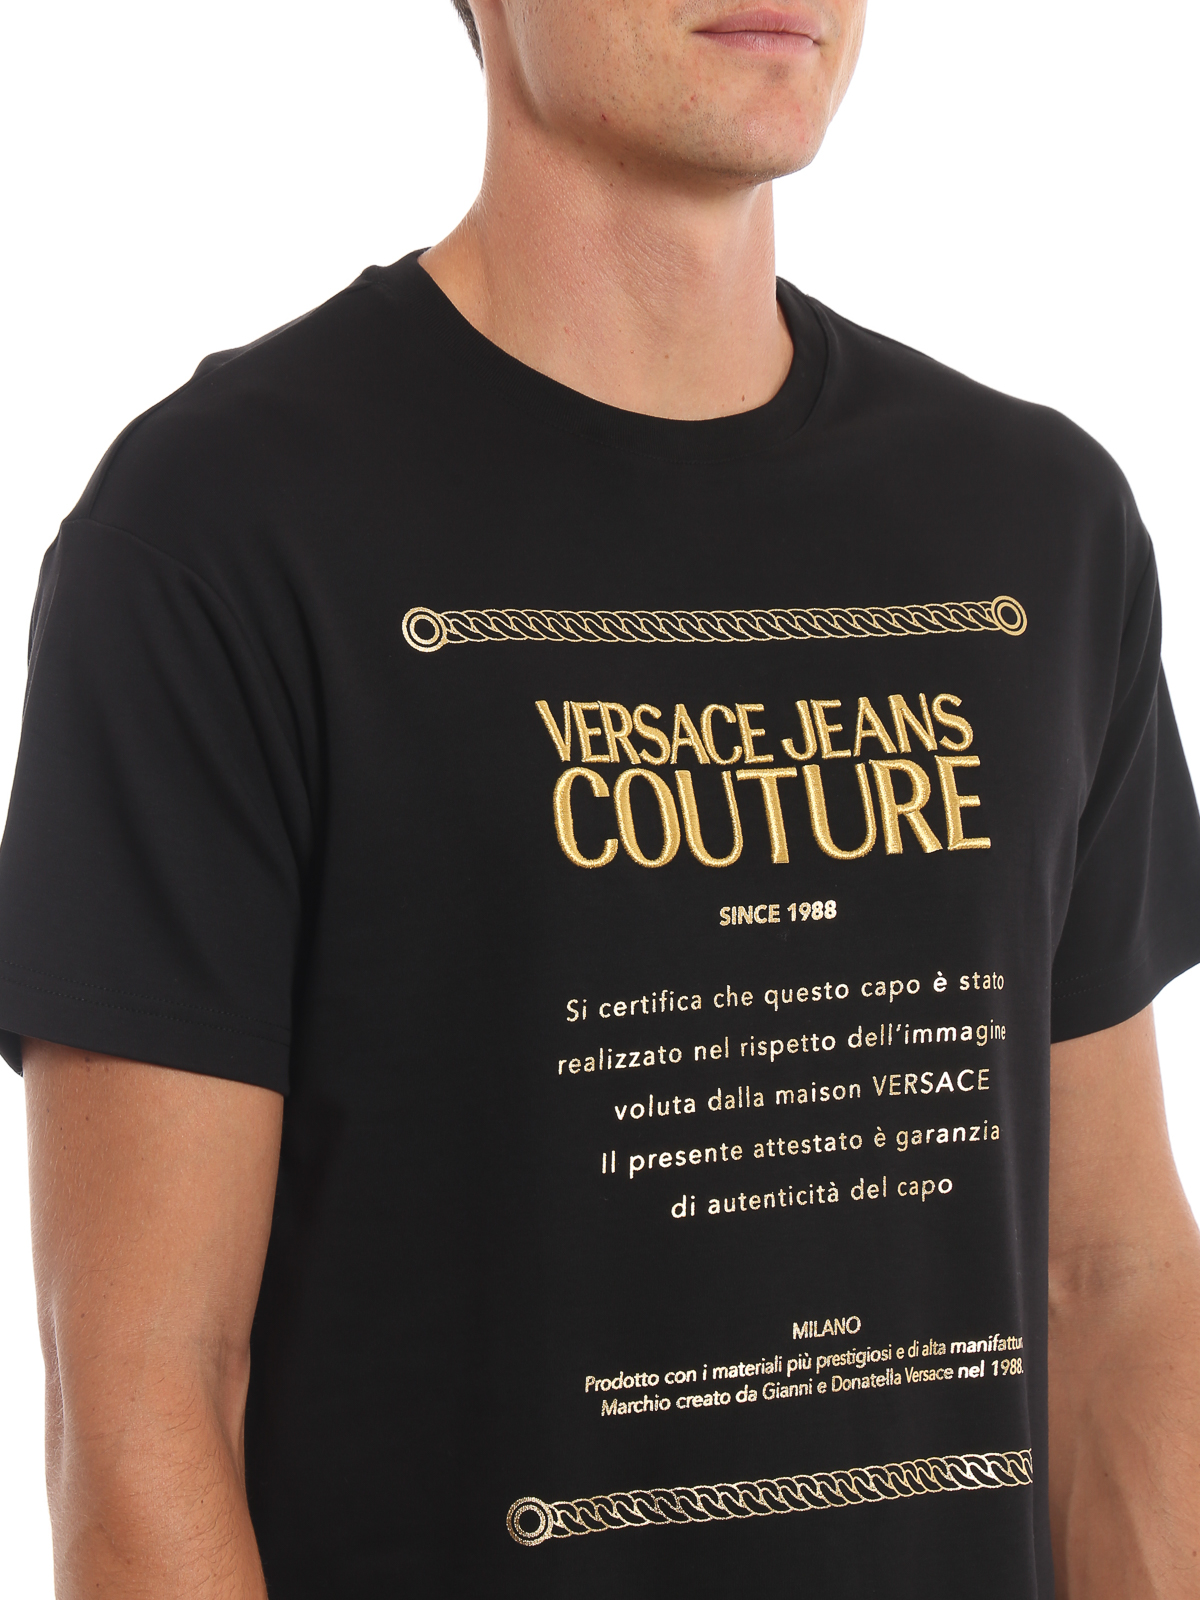 versace jeans couture tshirt